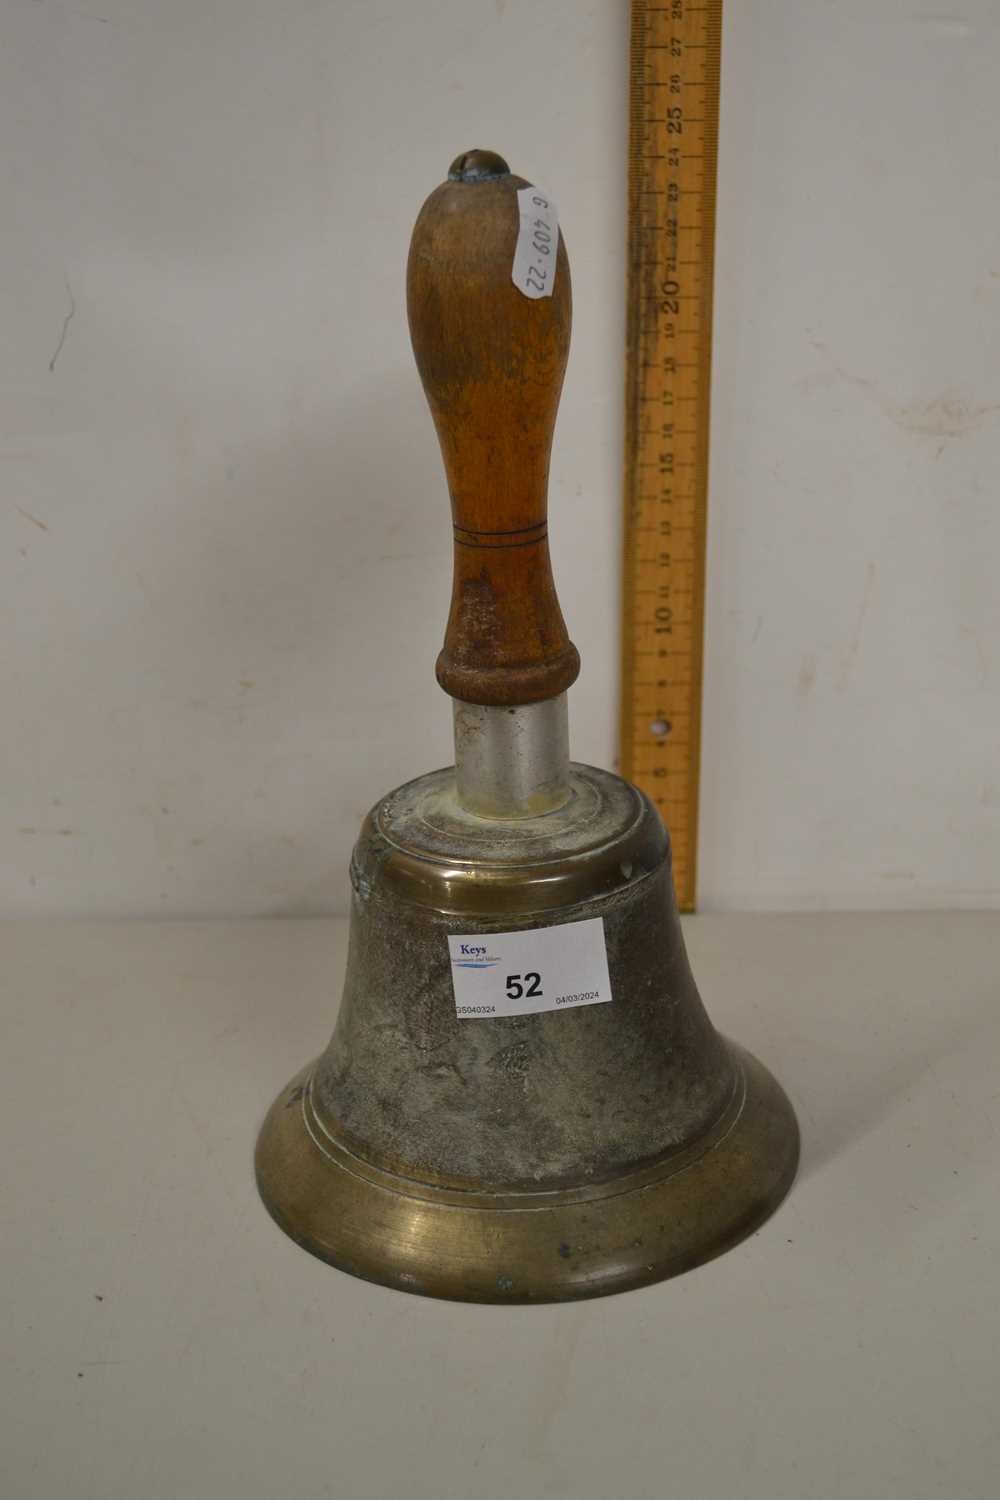 Brass and wood handled hand bell